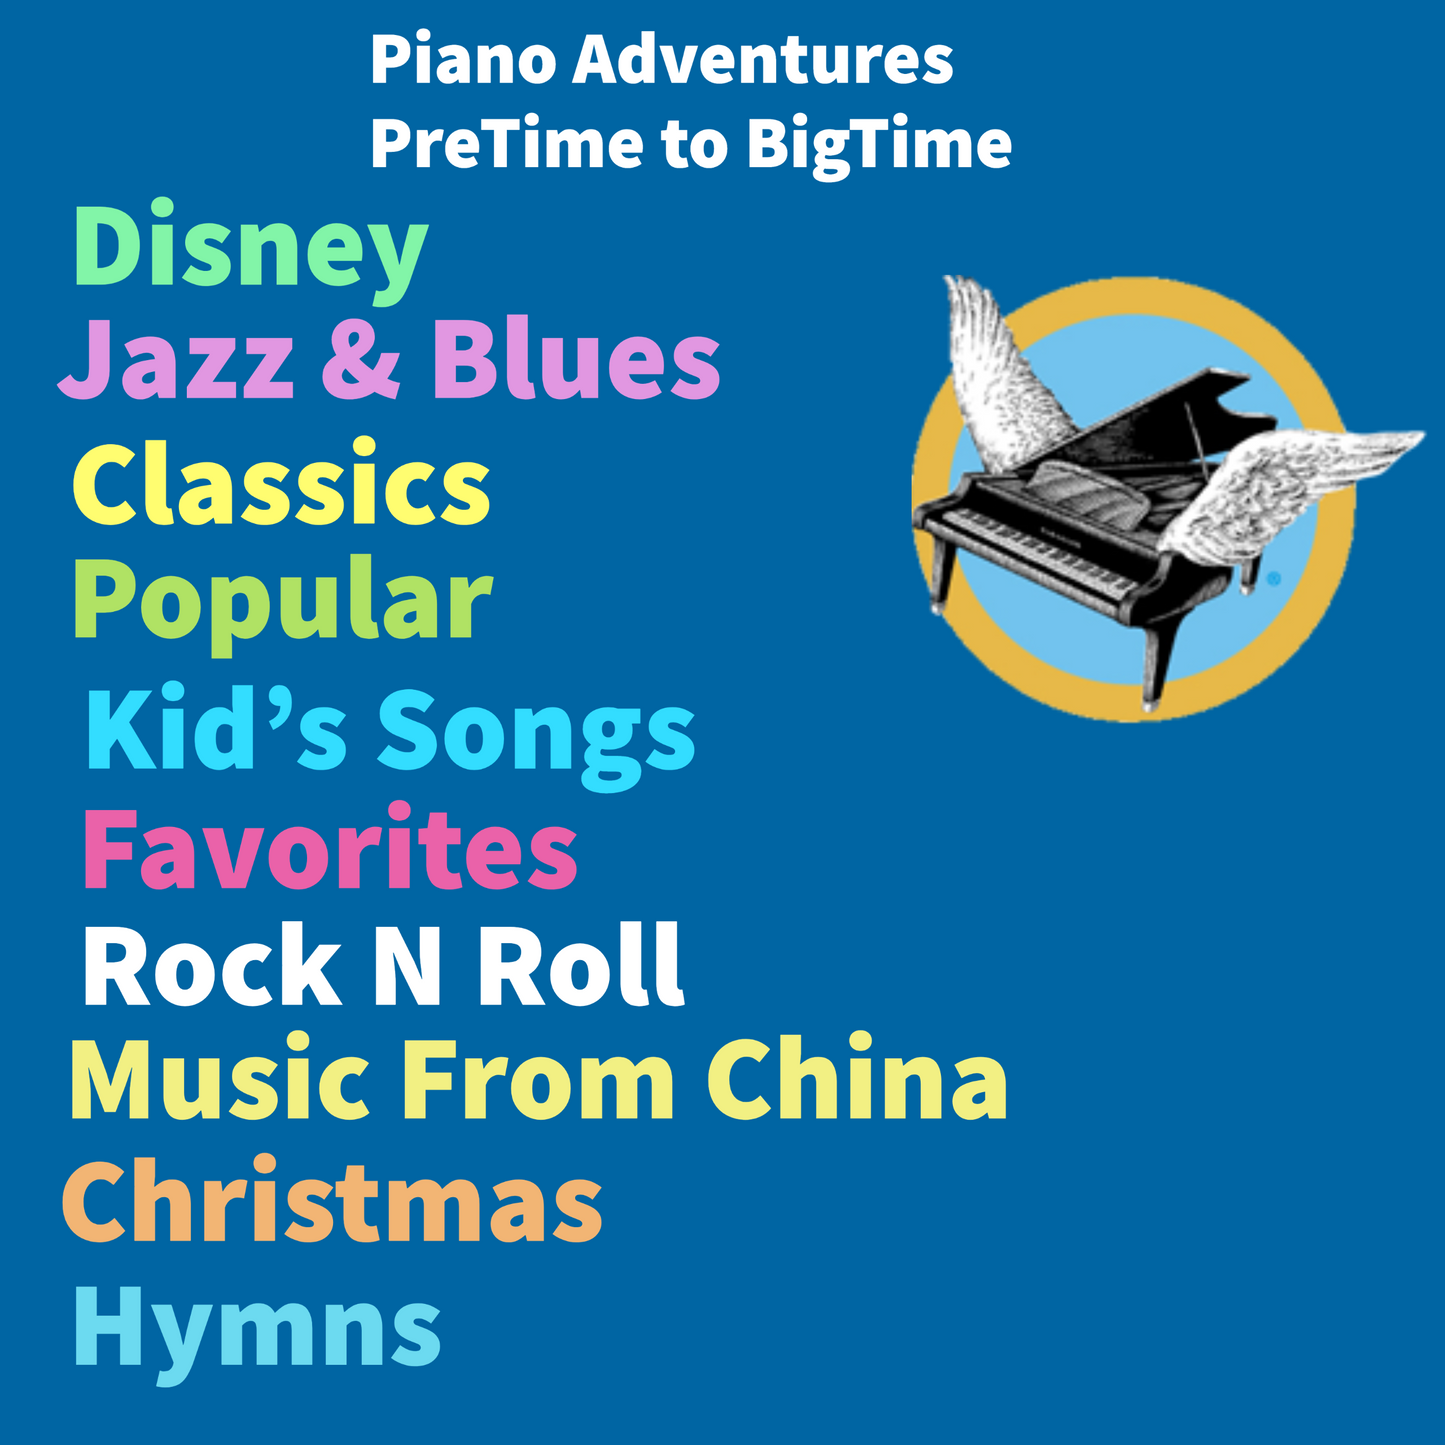 Faber Piano Adventures: ChordTime Piano Ragtime & Marches Level 2B Book